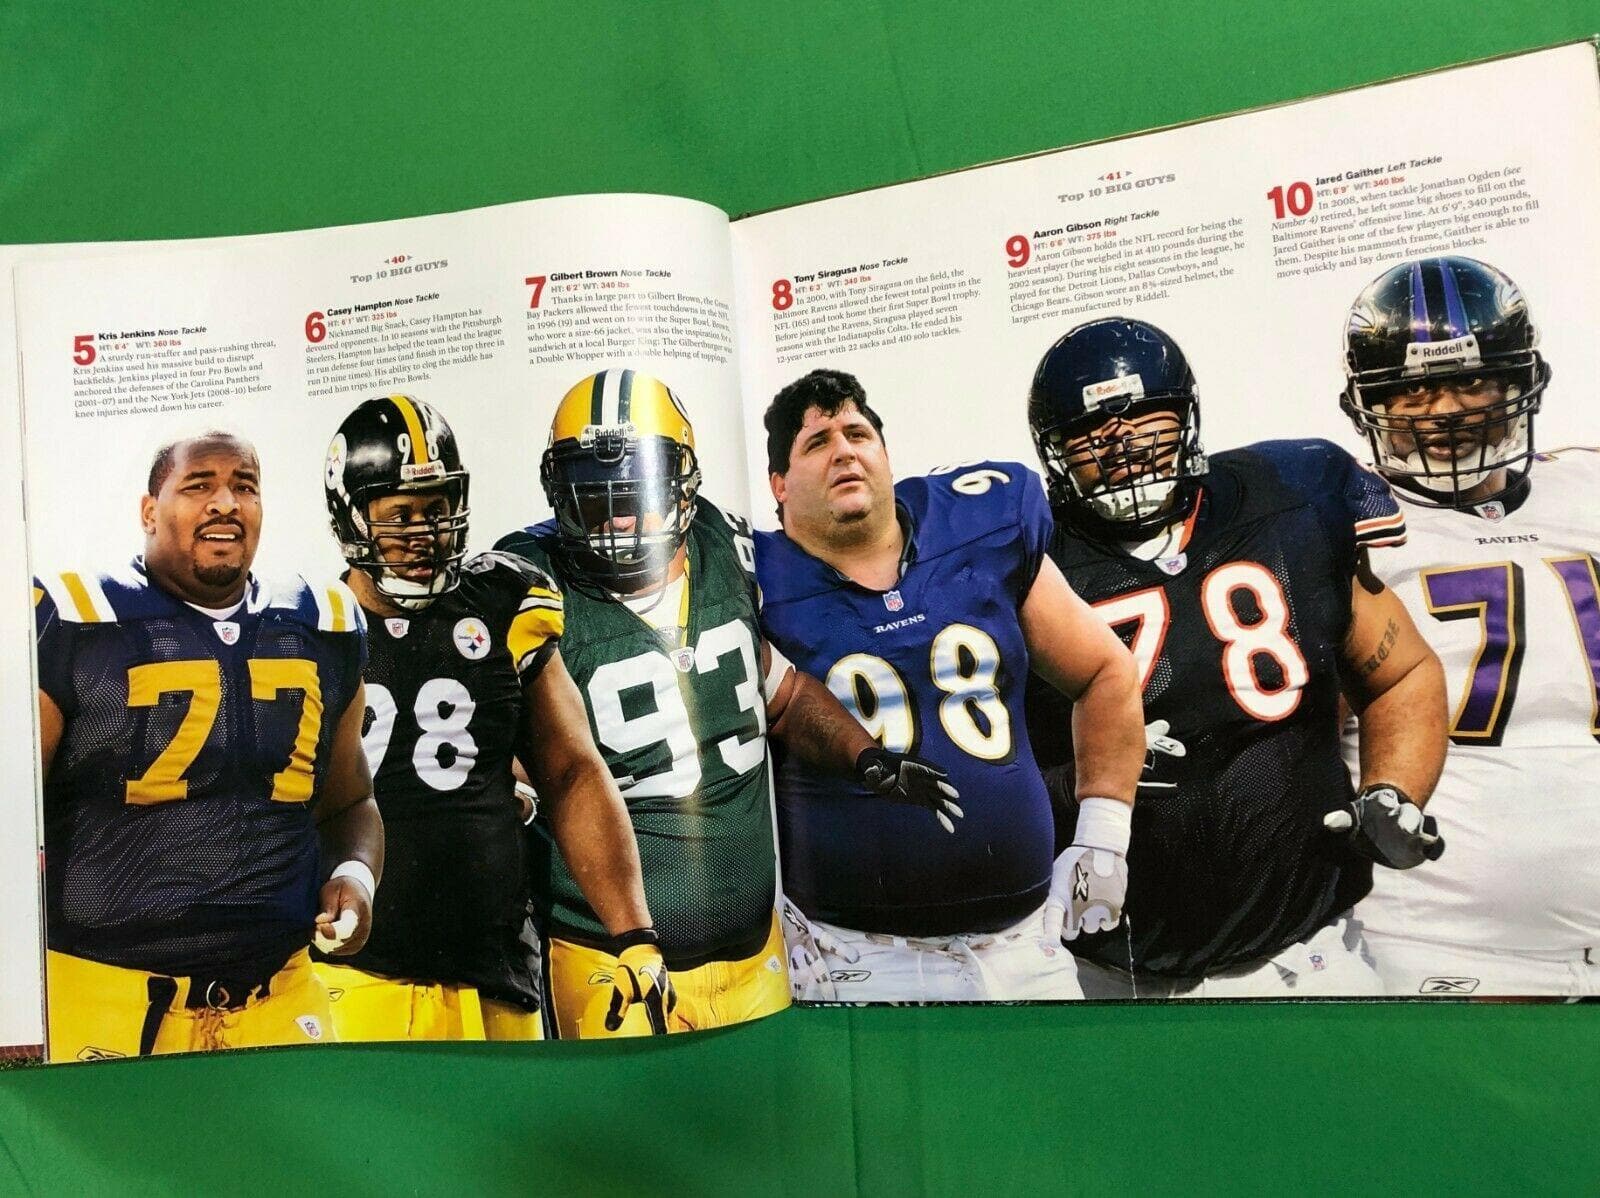 NFL Sports Illustrated Kids "1st and 10 Top 10 Lists of Everything in American Football"